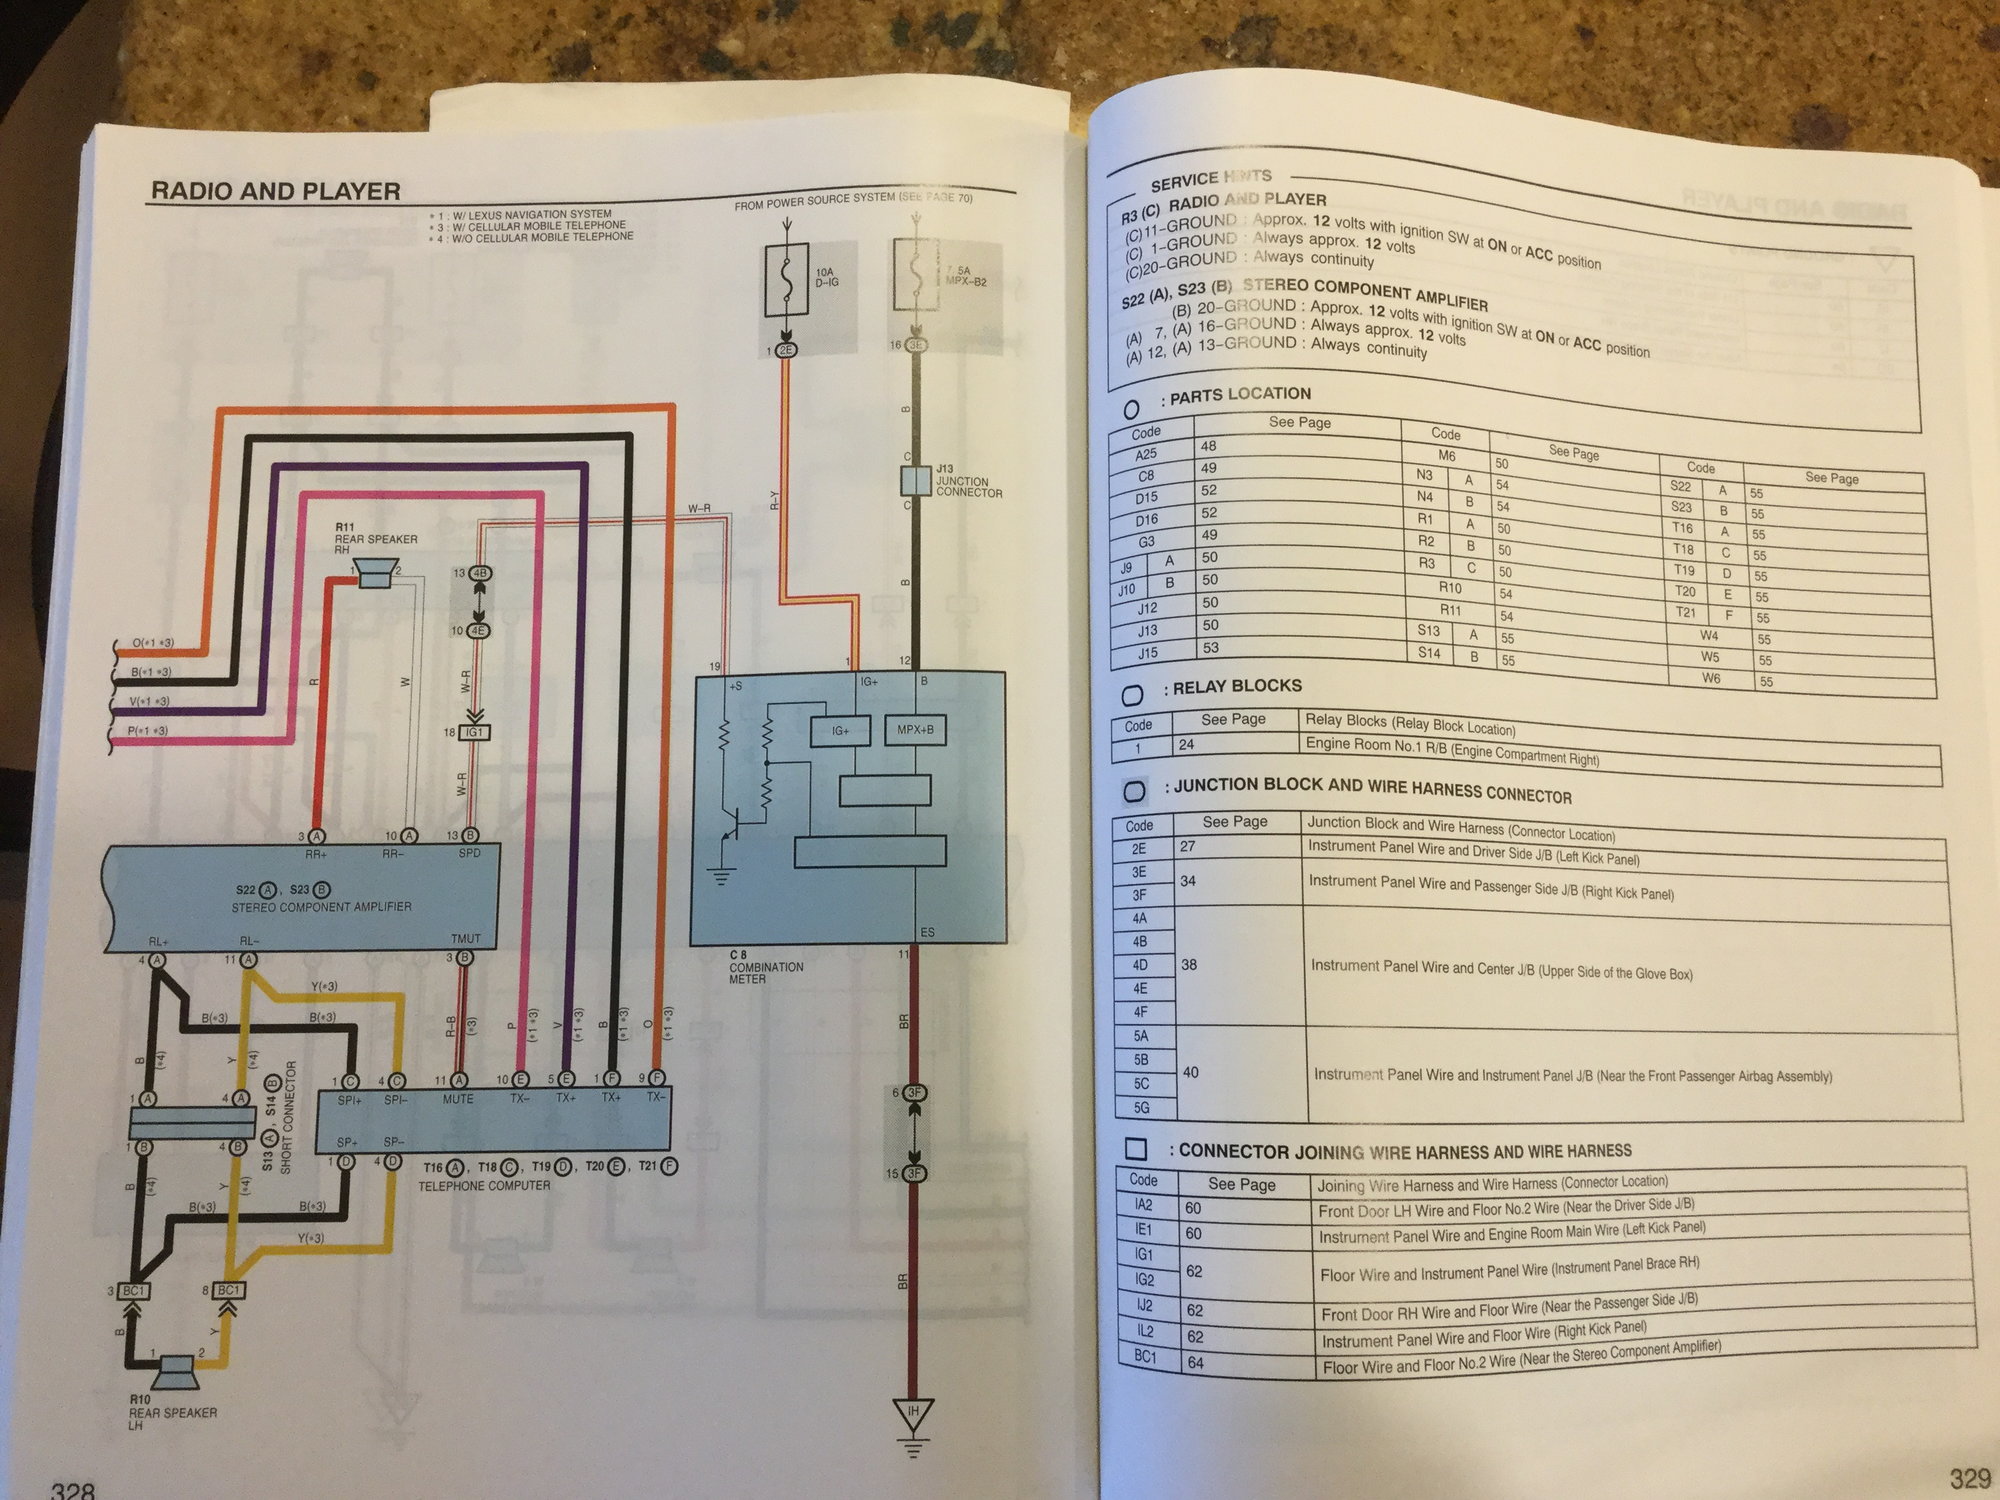 Wiring diagram for stereo wires? - ClubLexus - Lexus Forum Discussion